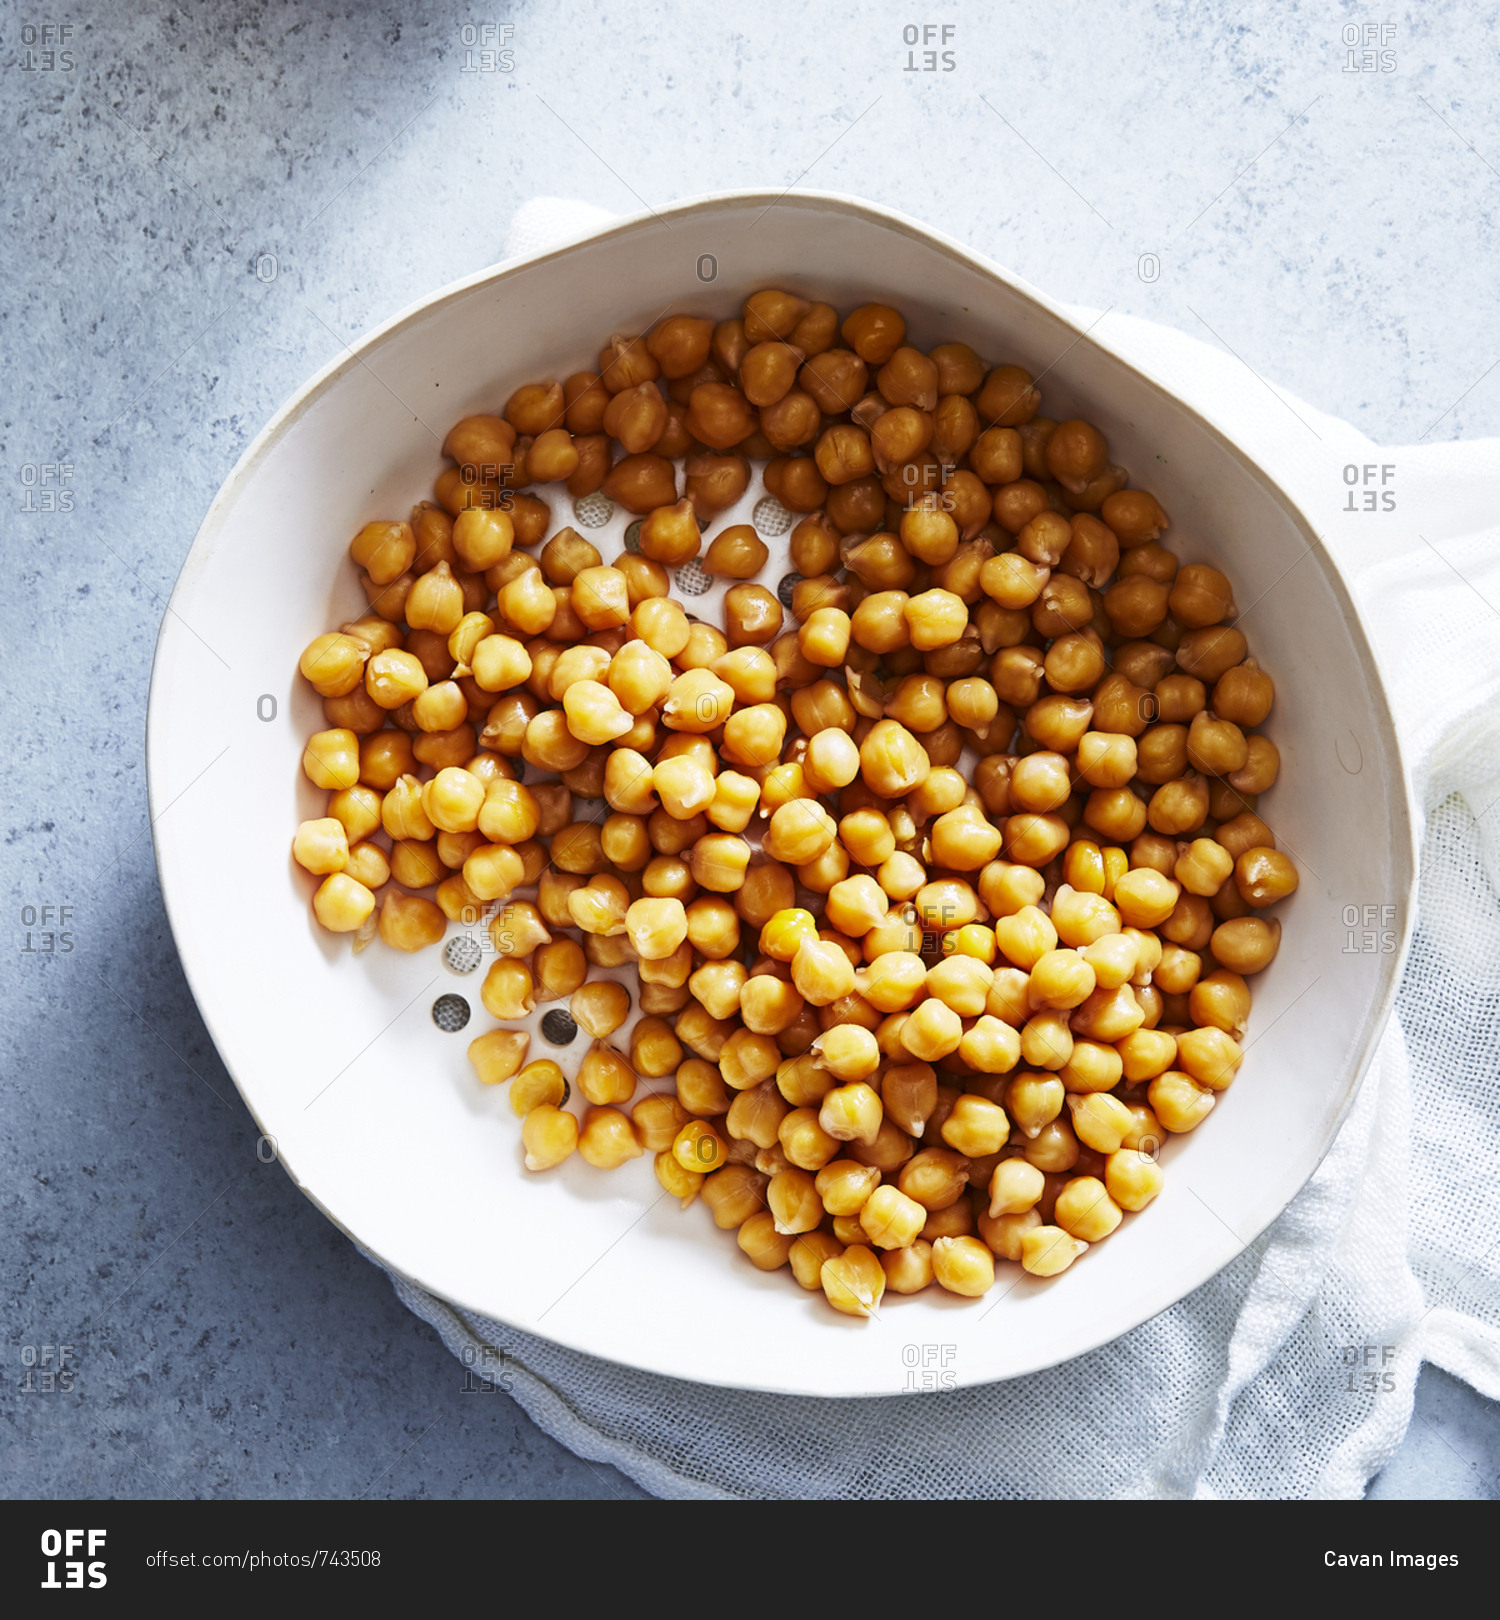 Overhead view of chick-peas in bowl with napkin on table